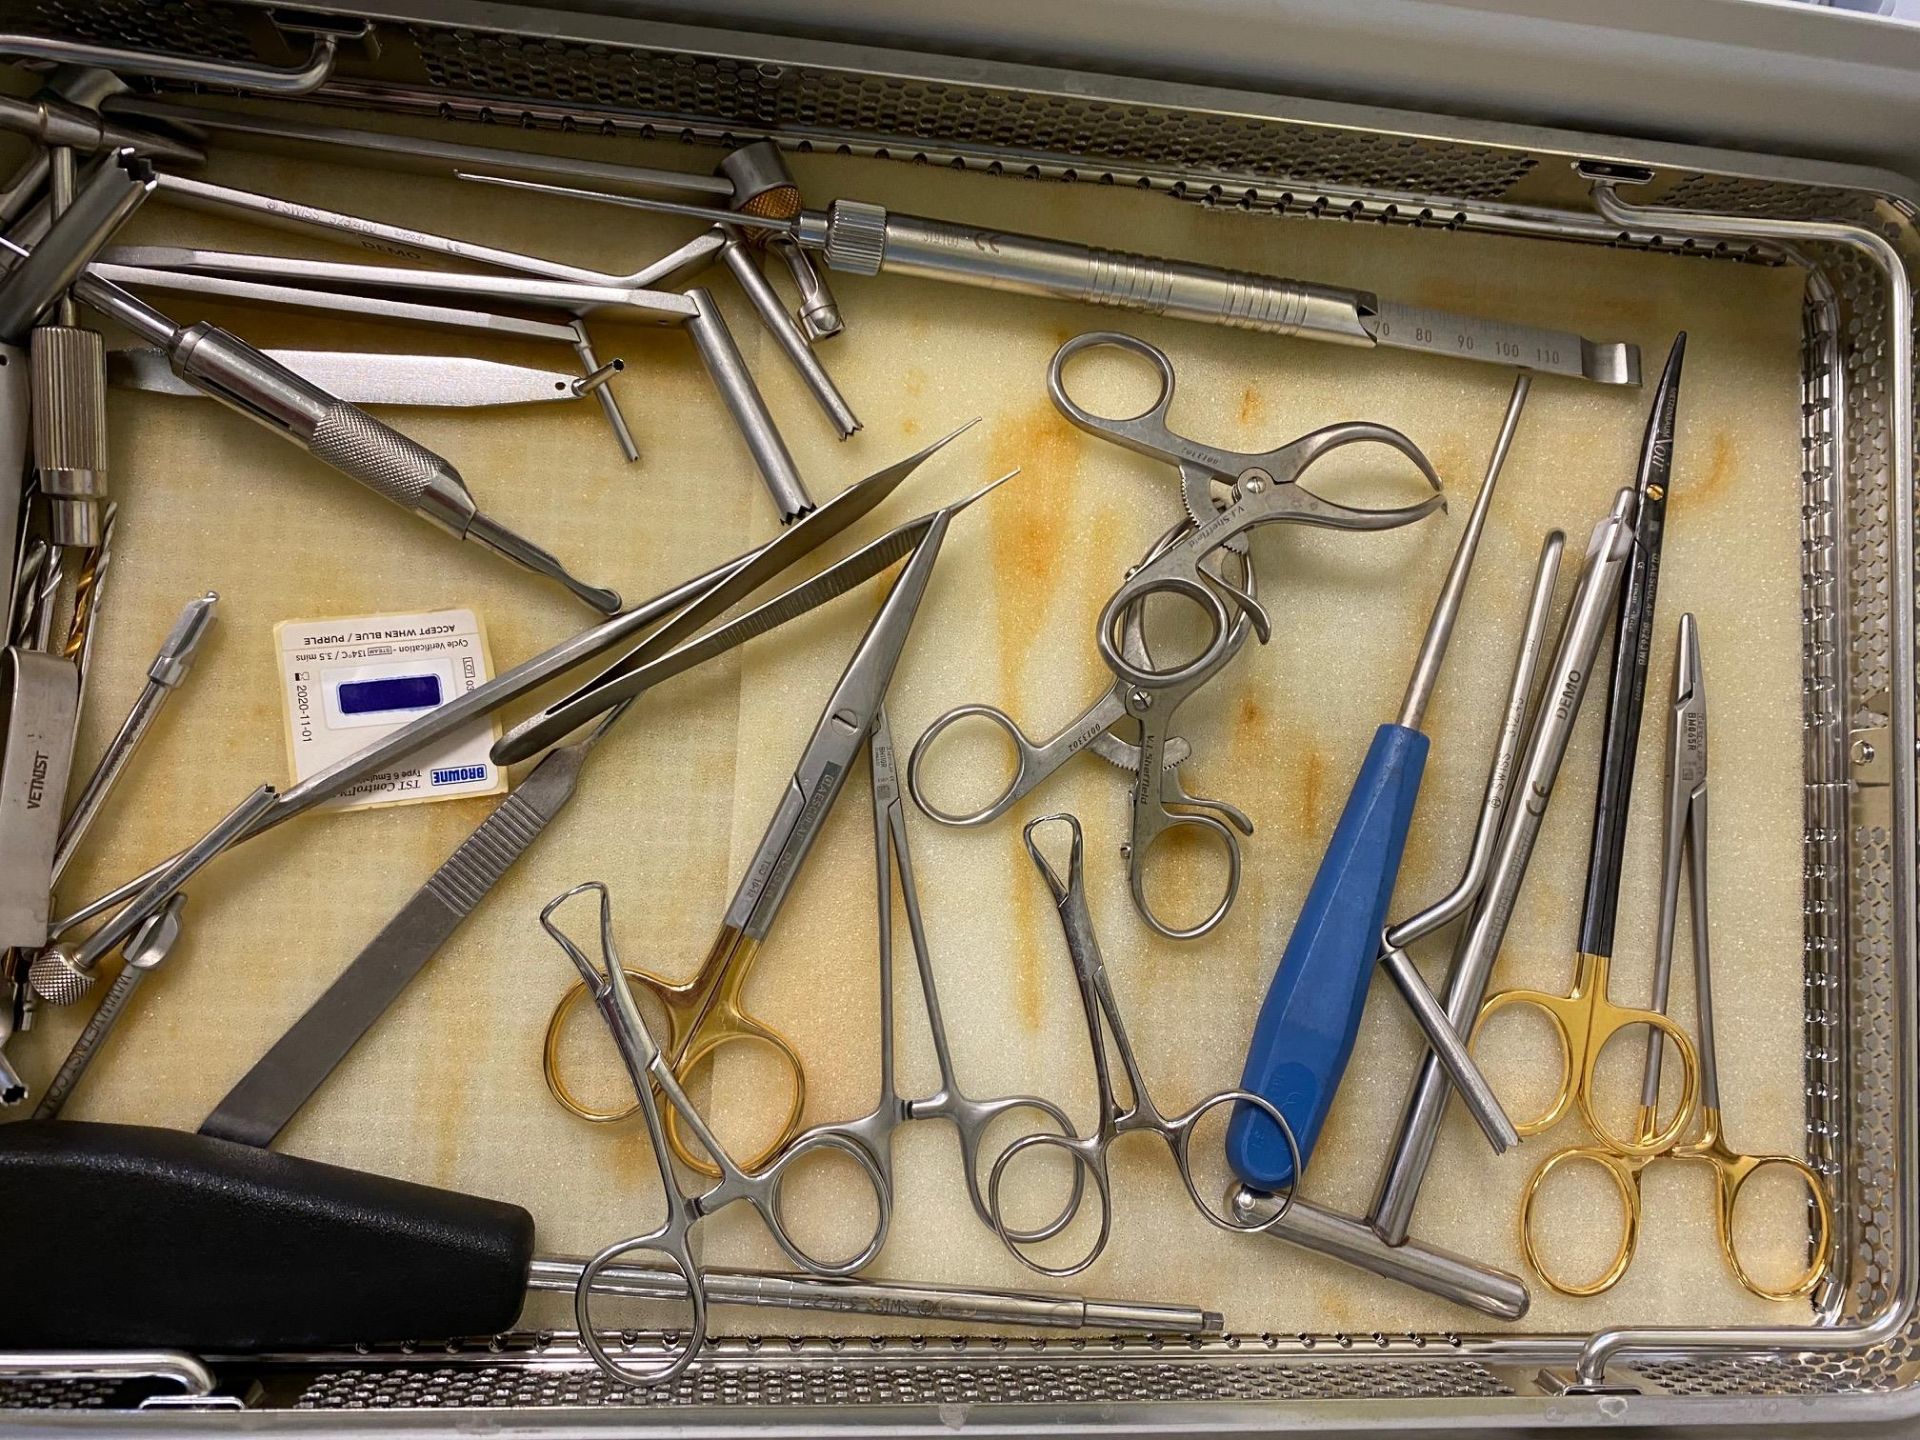 Aesculap surgical storage container including Dissecting scissors, surgical drills 2.7mm to 4. - Image 3 of 4